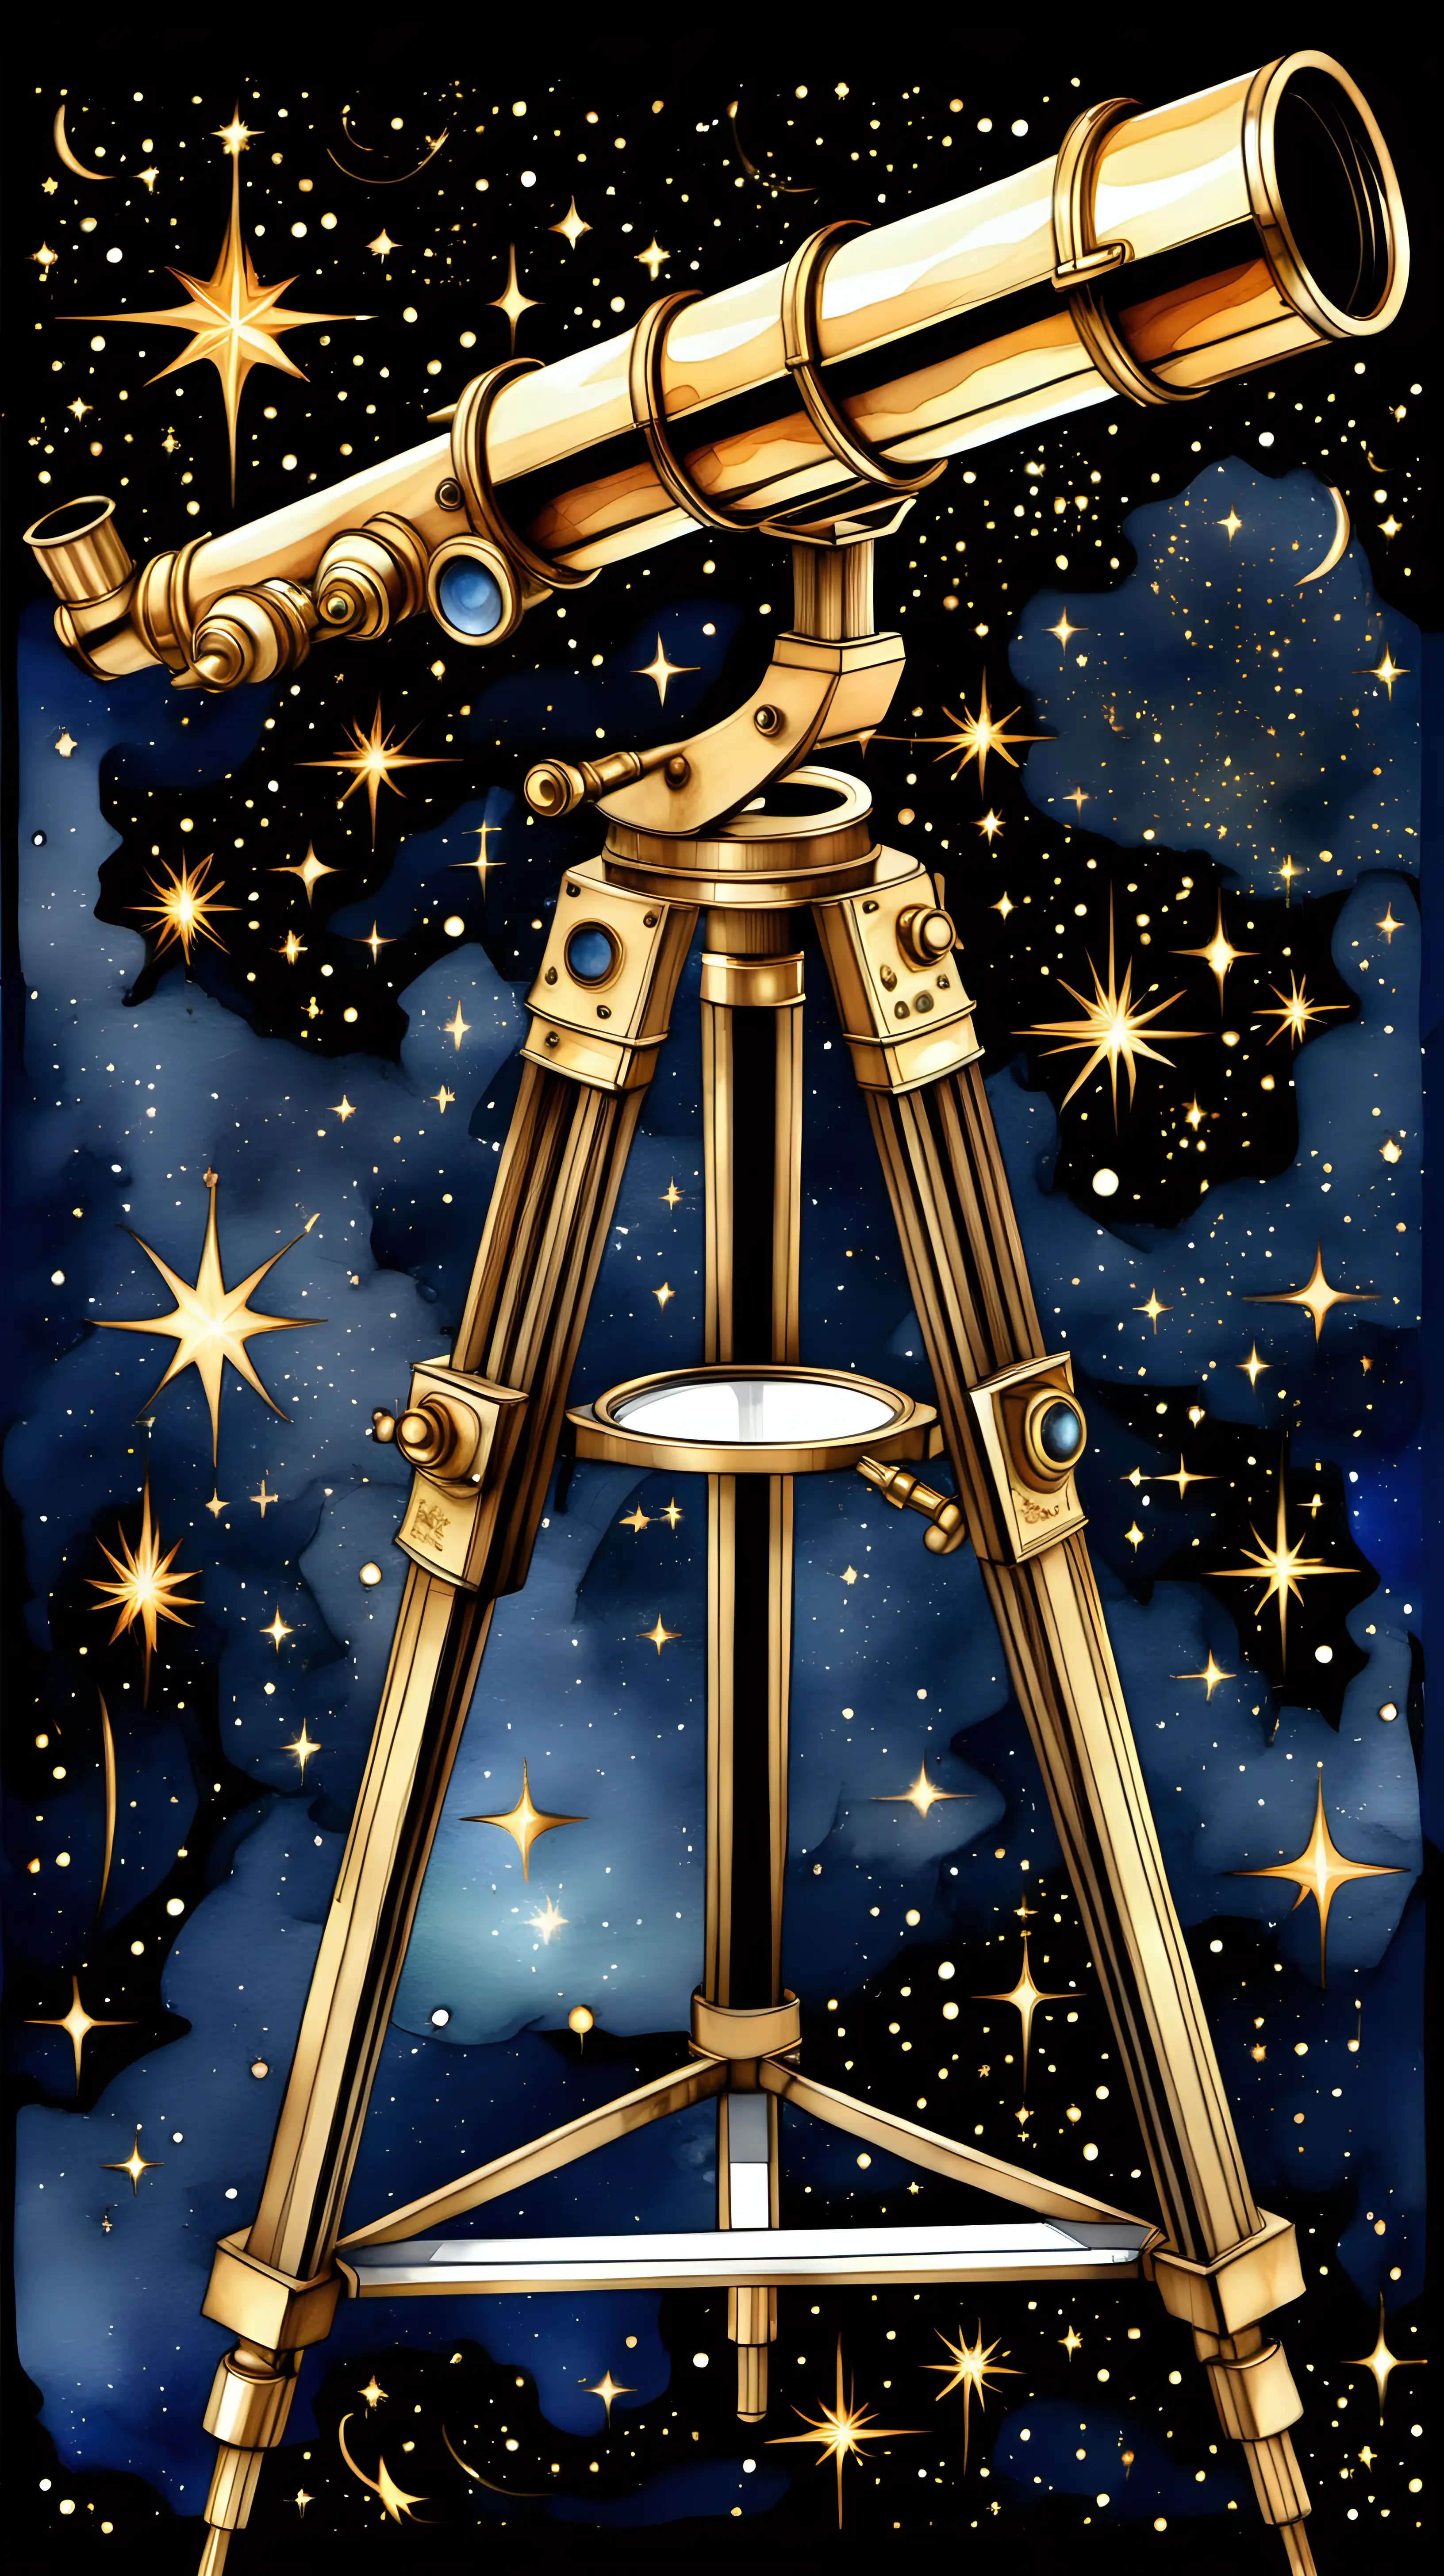 watercolor telescope beautiful intricate designs, telescope with constellations engraved, gold telescope, just the telescope, no tripod, use watercolor style